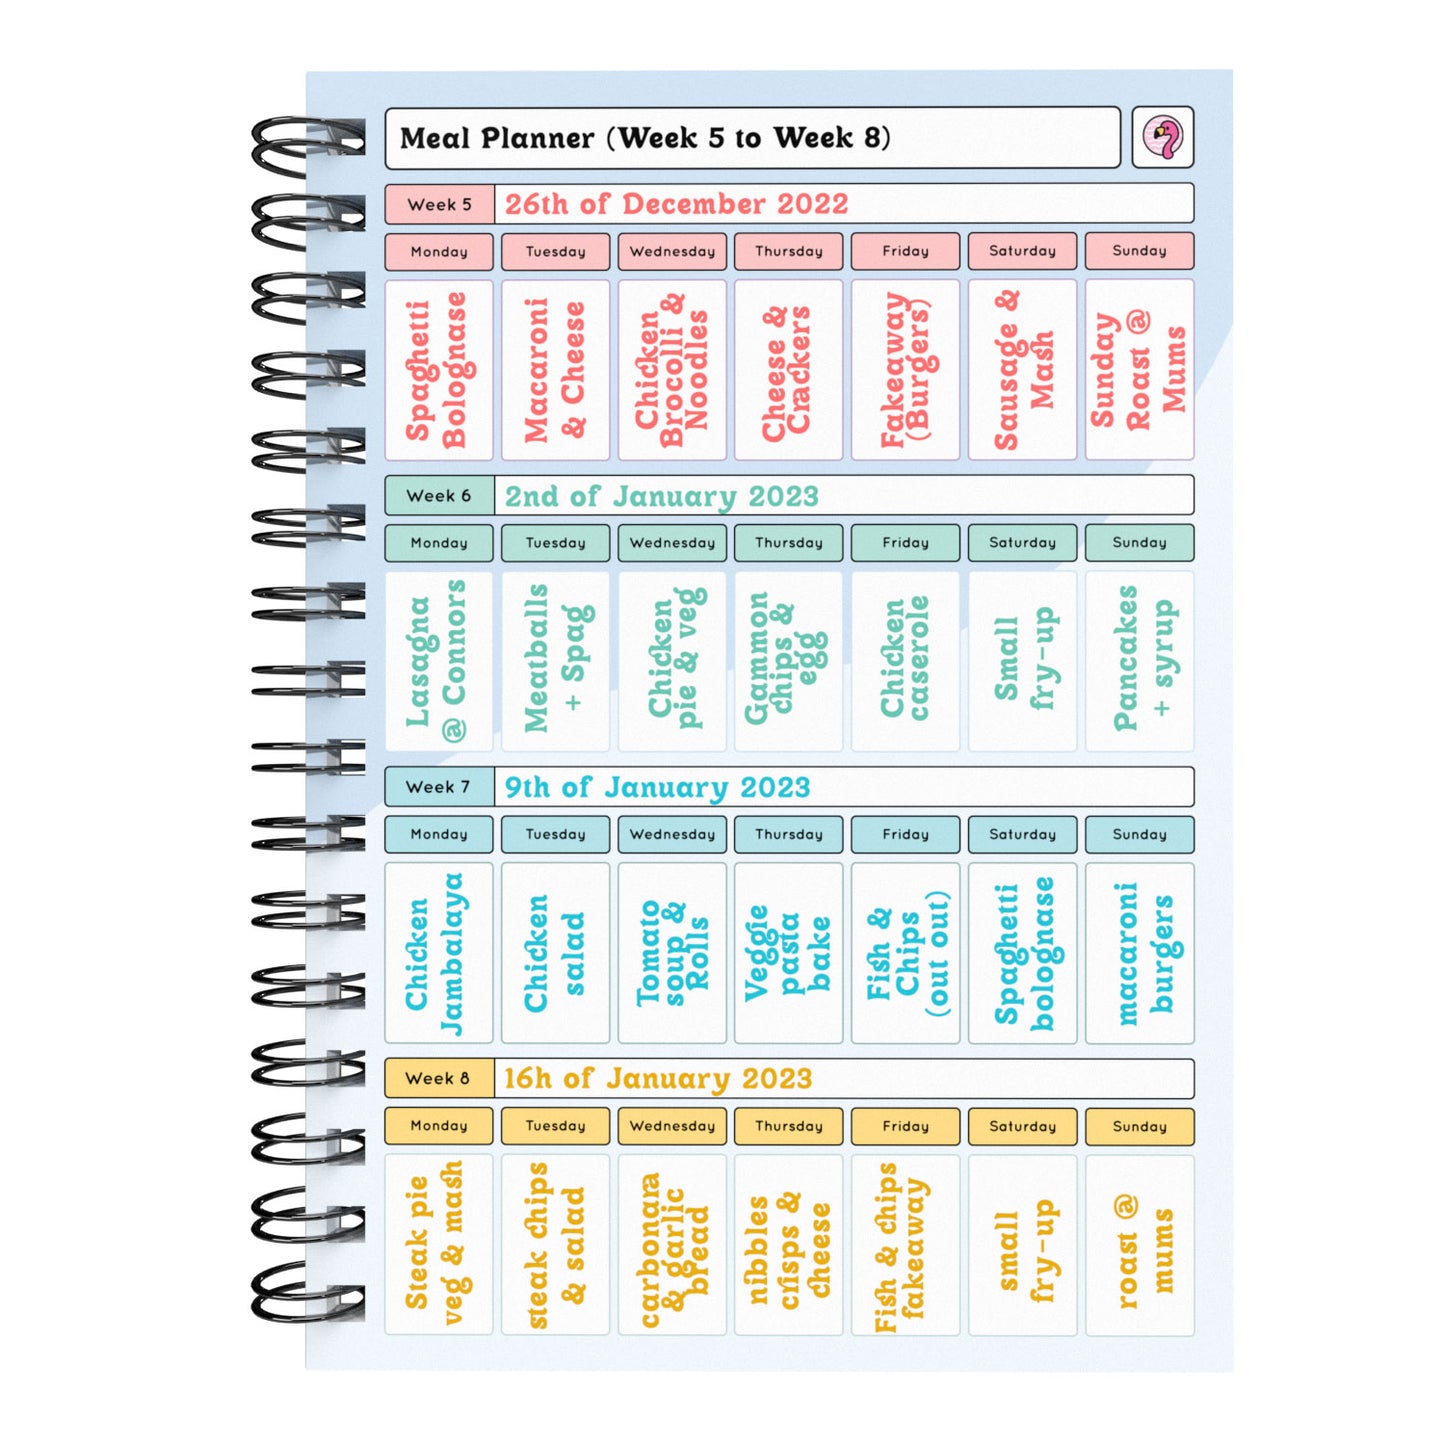 Food Diary - C1 - Calorie Counting